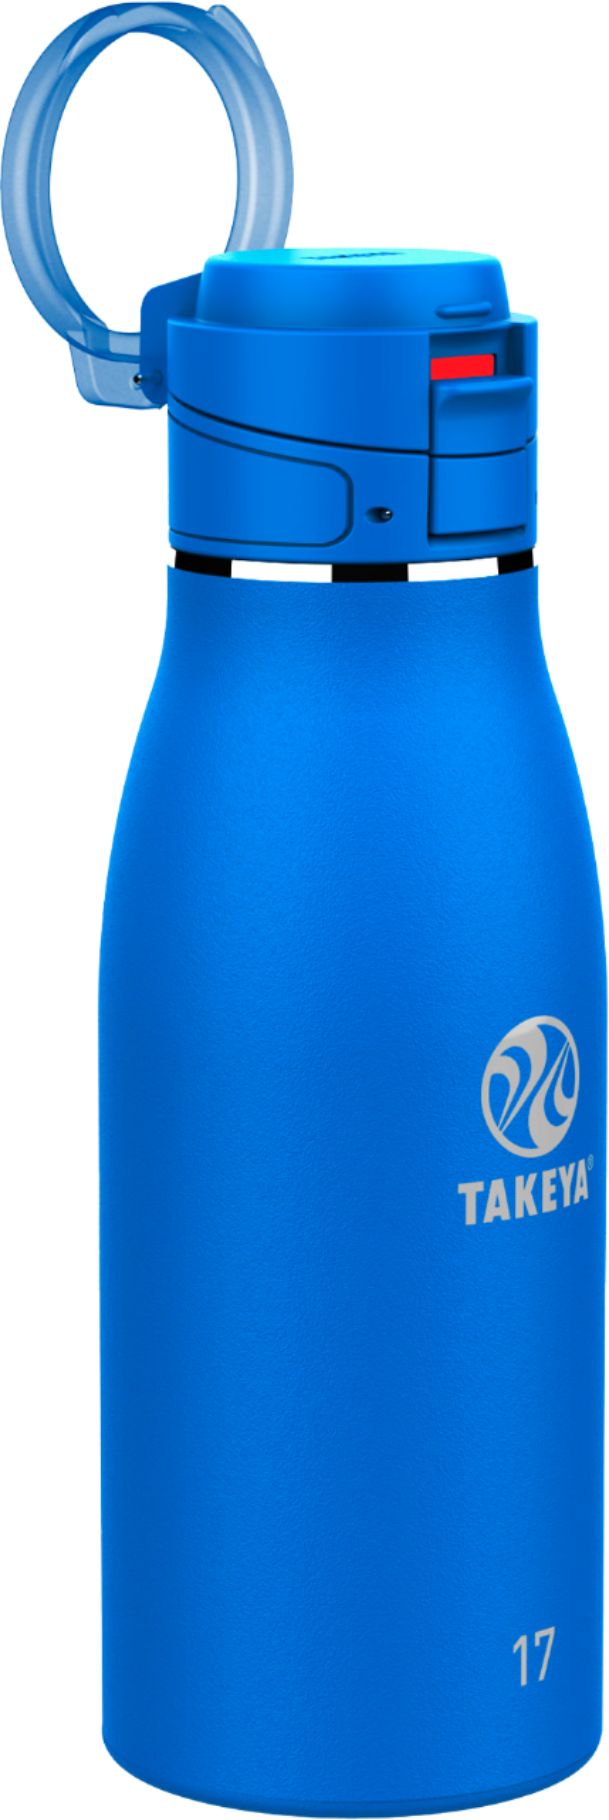 Takeya Actives Traveler Insulated Stainless Steel Bottle with Flip